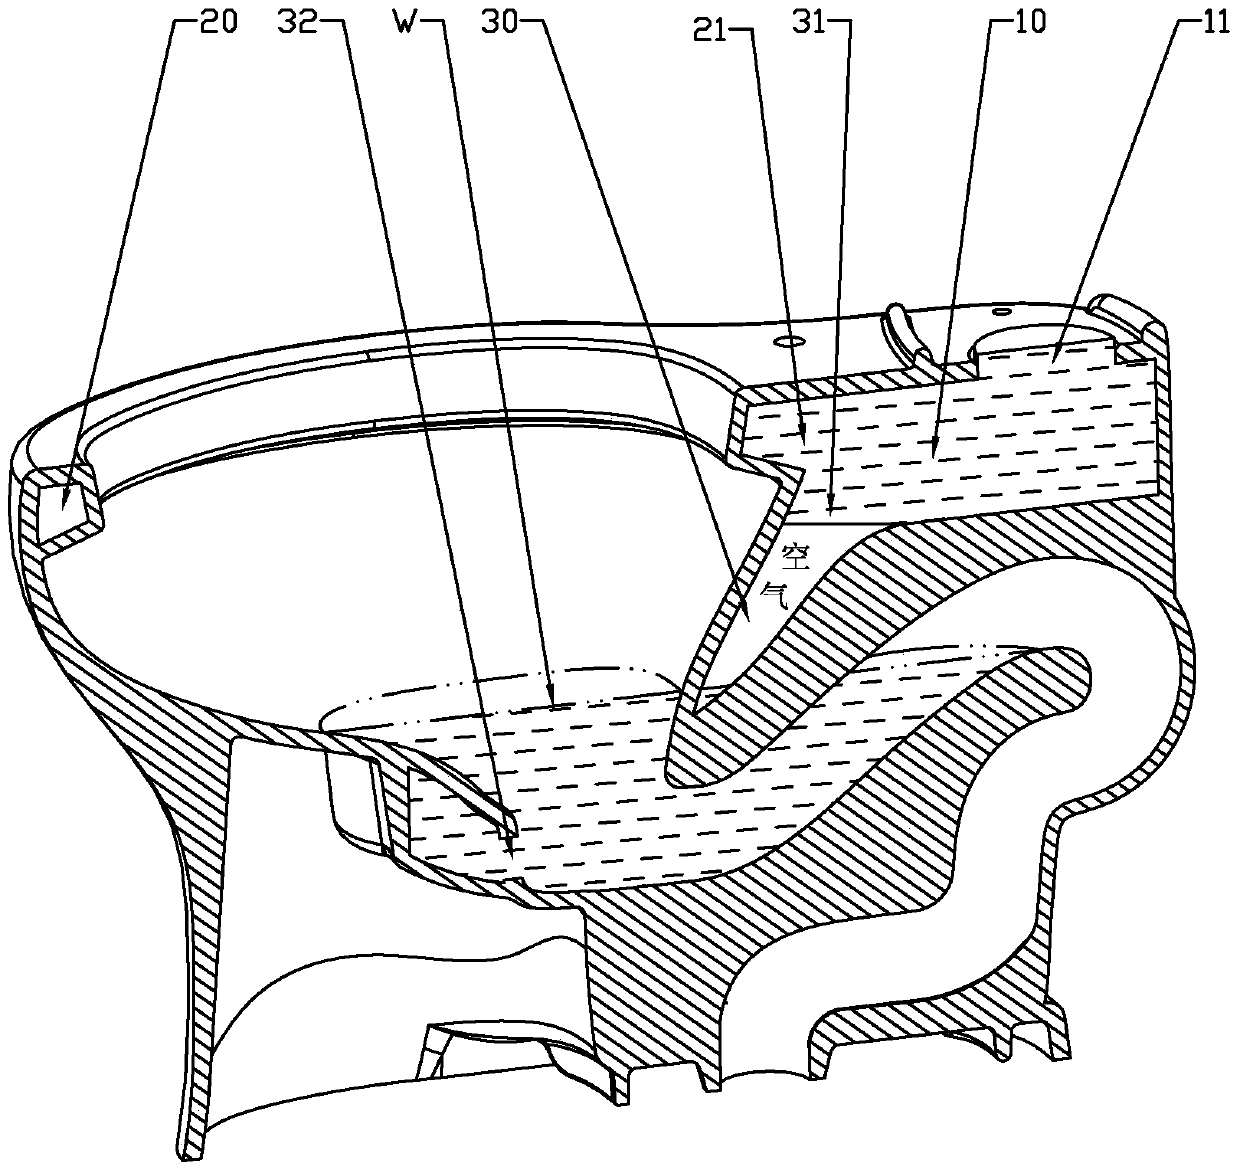 A toilet flushing waterway structure and toilet seat with accelerated siphon